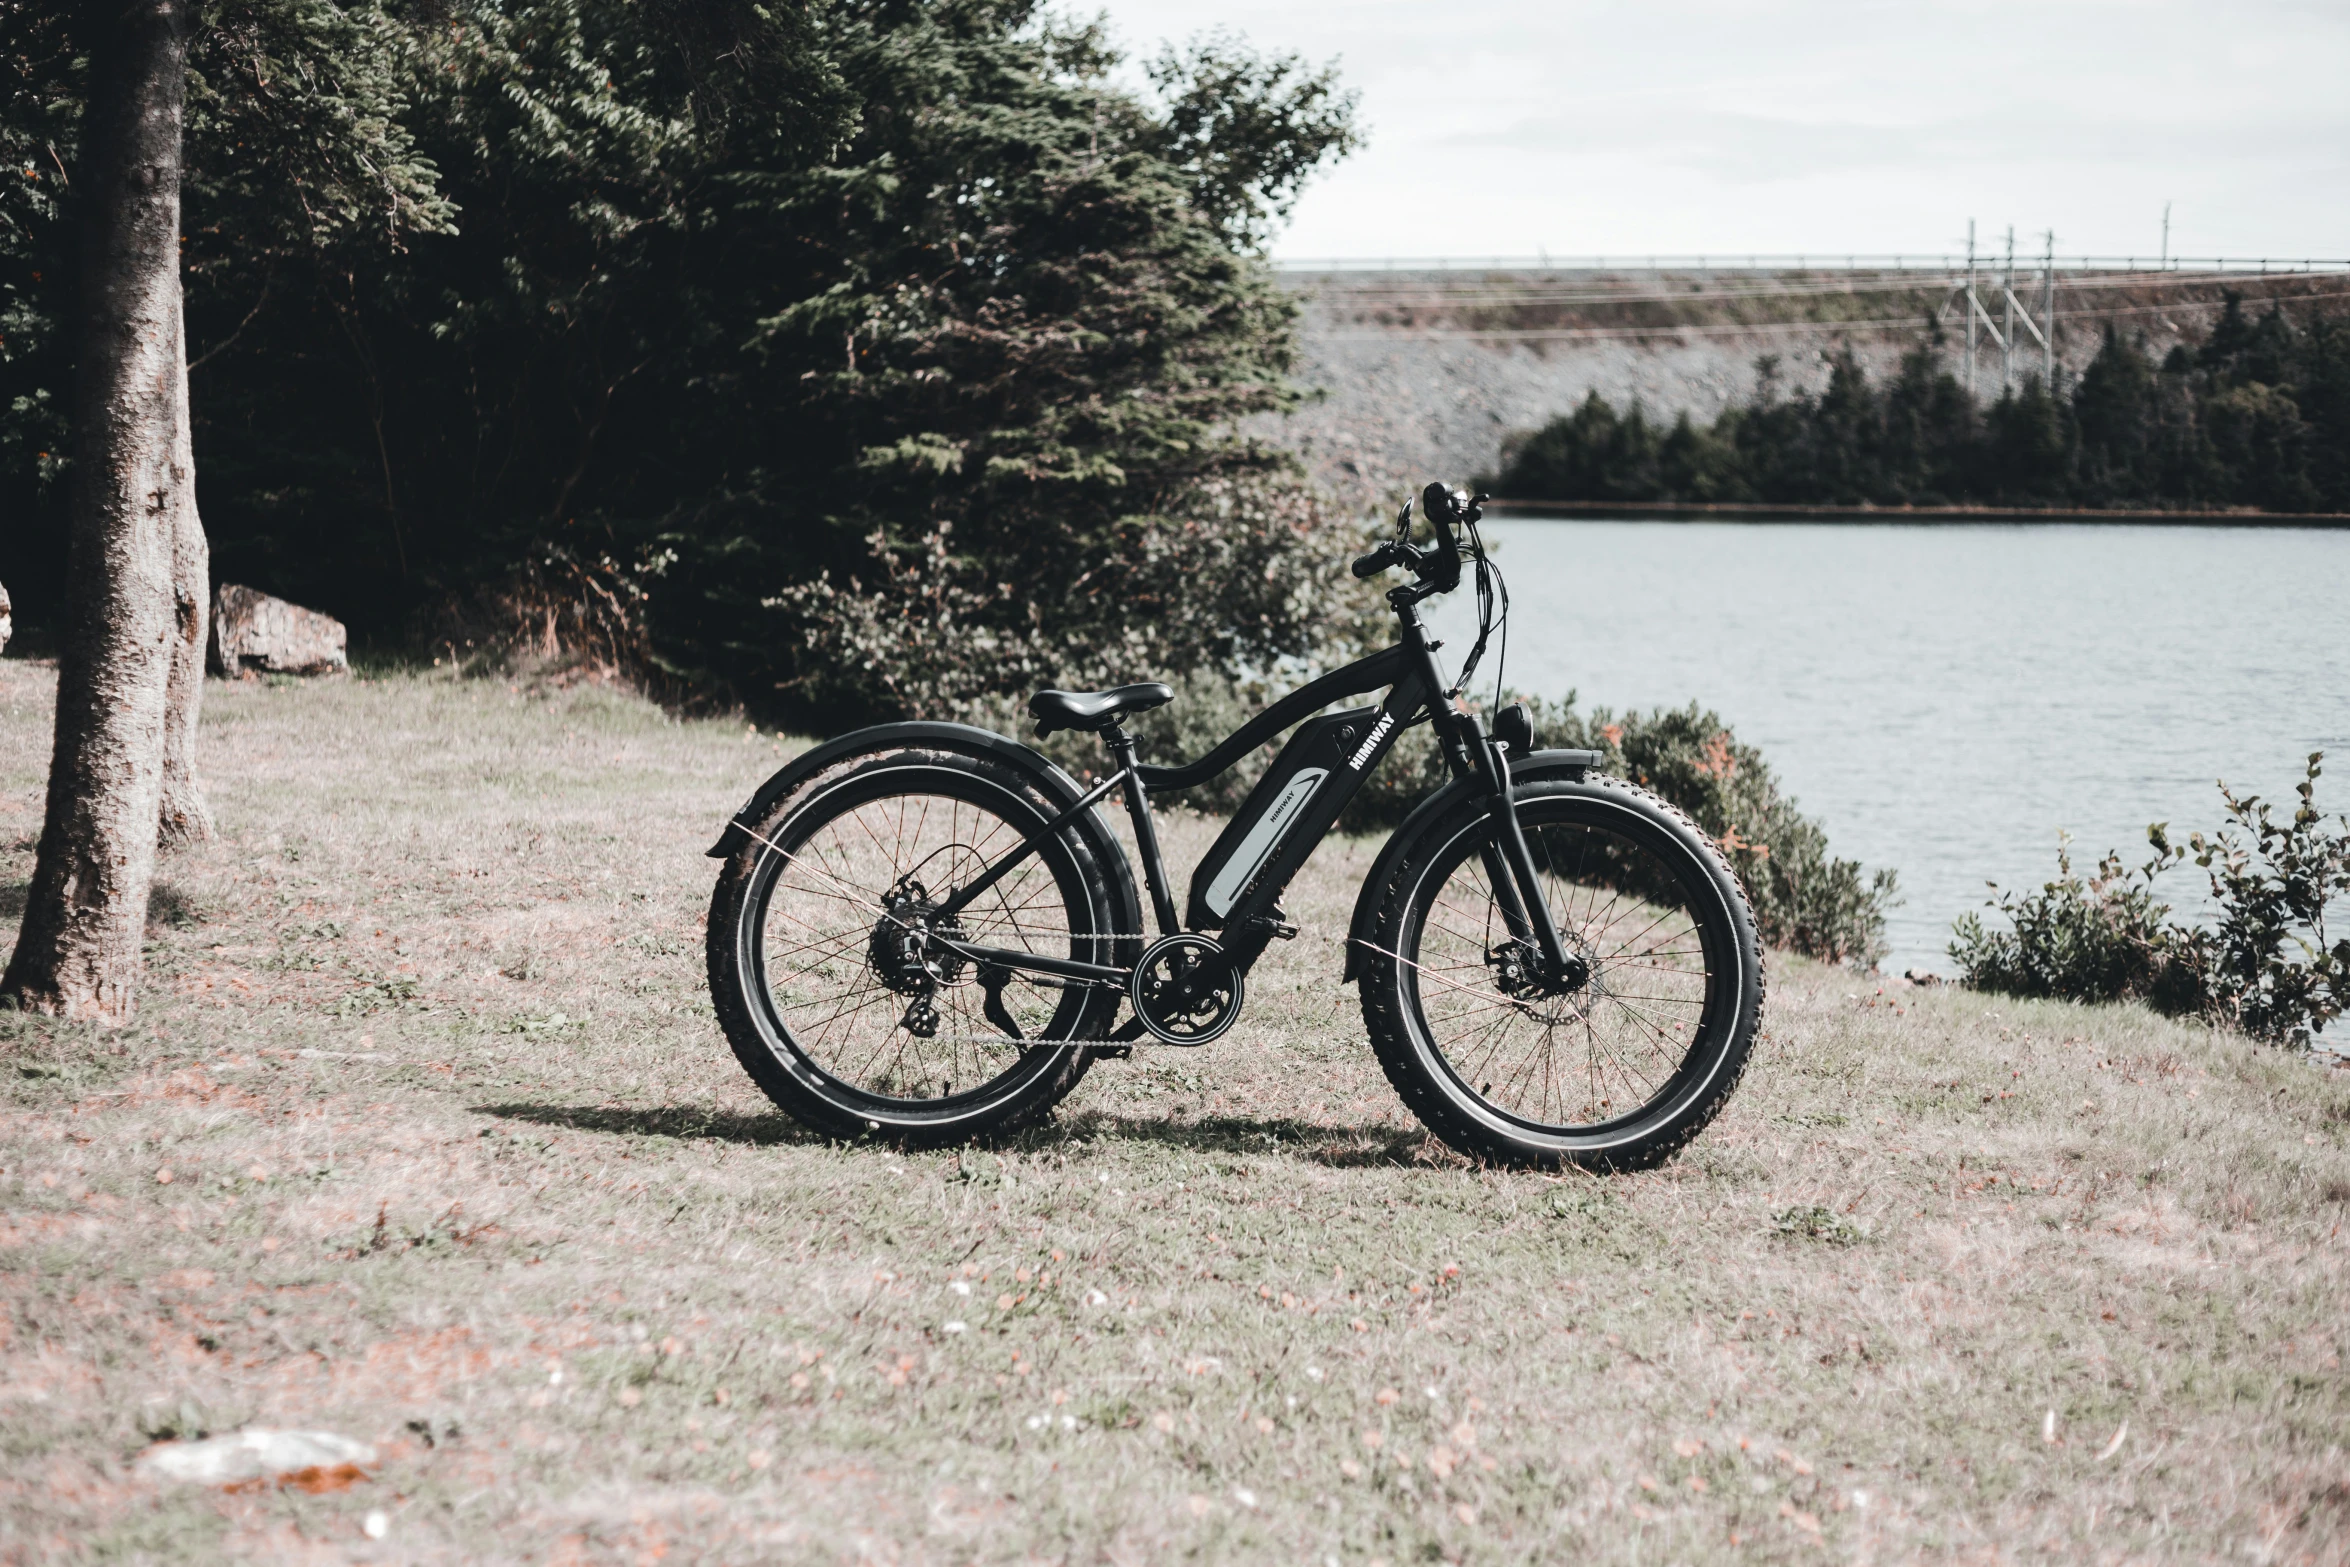 a single bicycle parked on the edge of some grass by a river